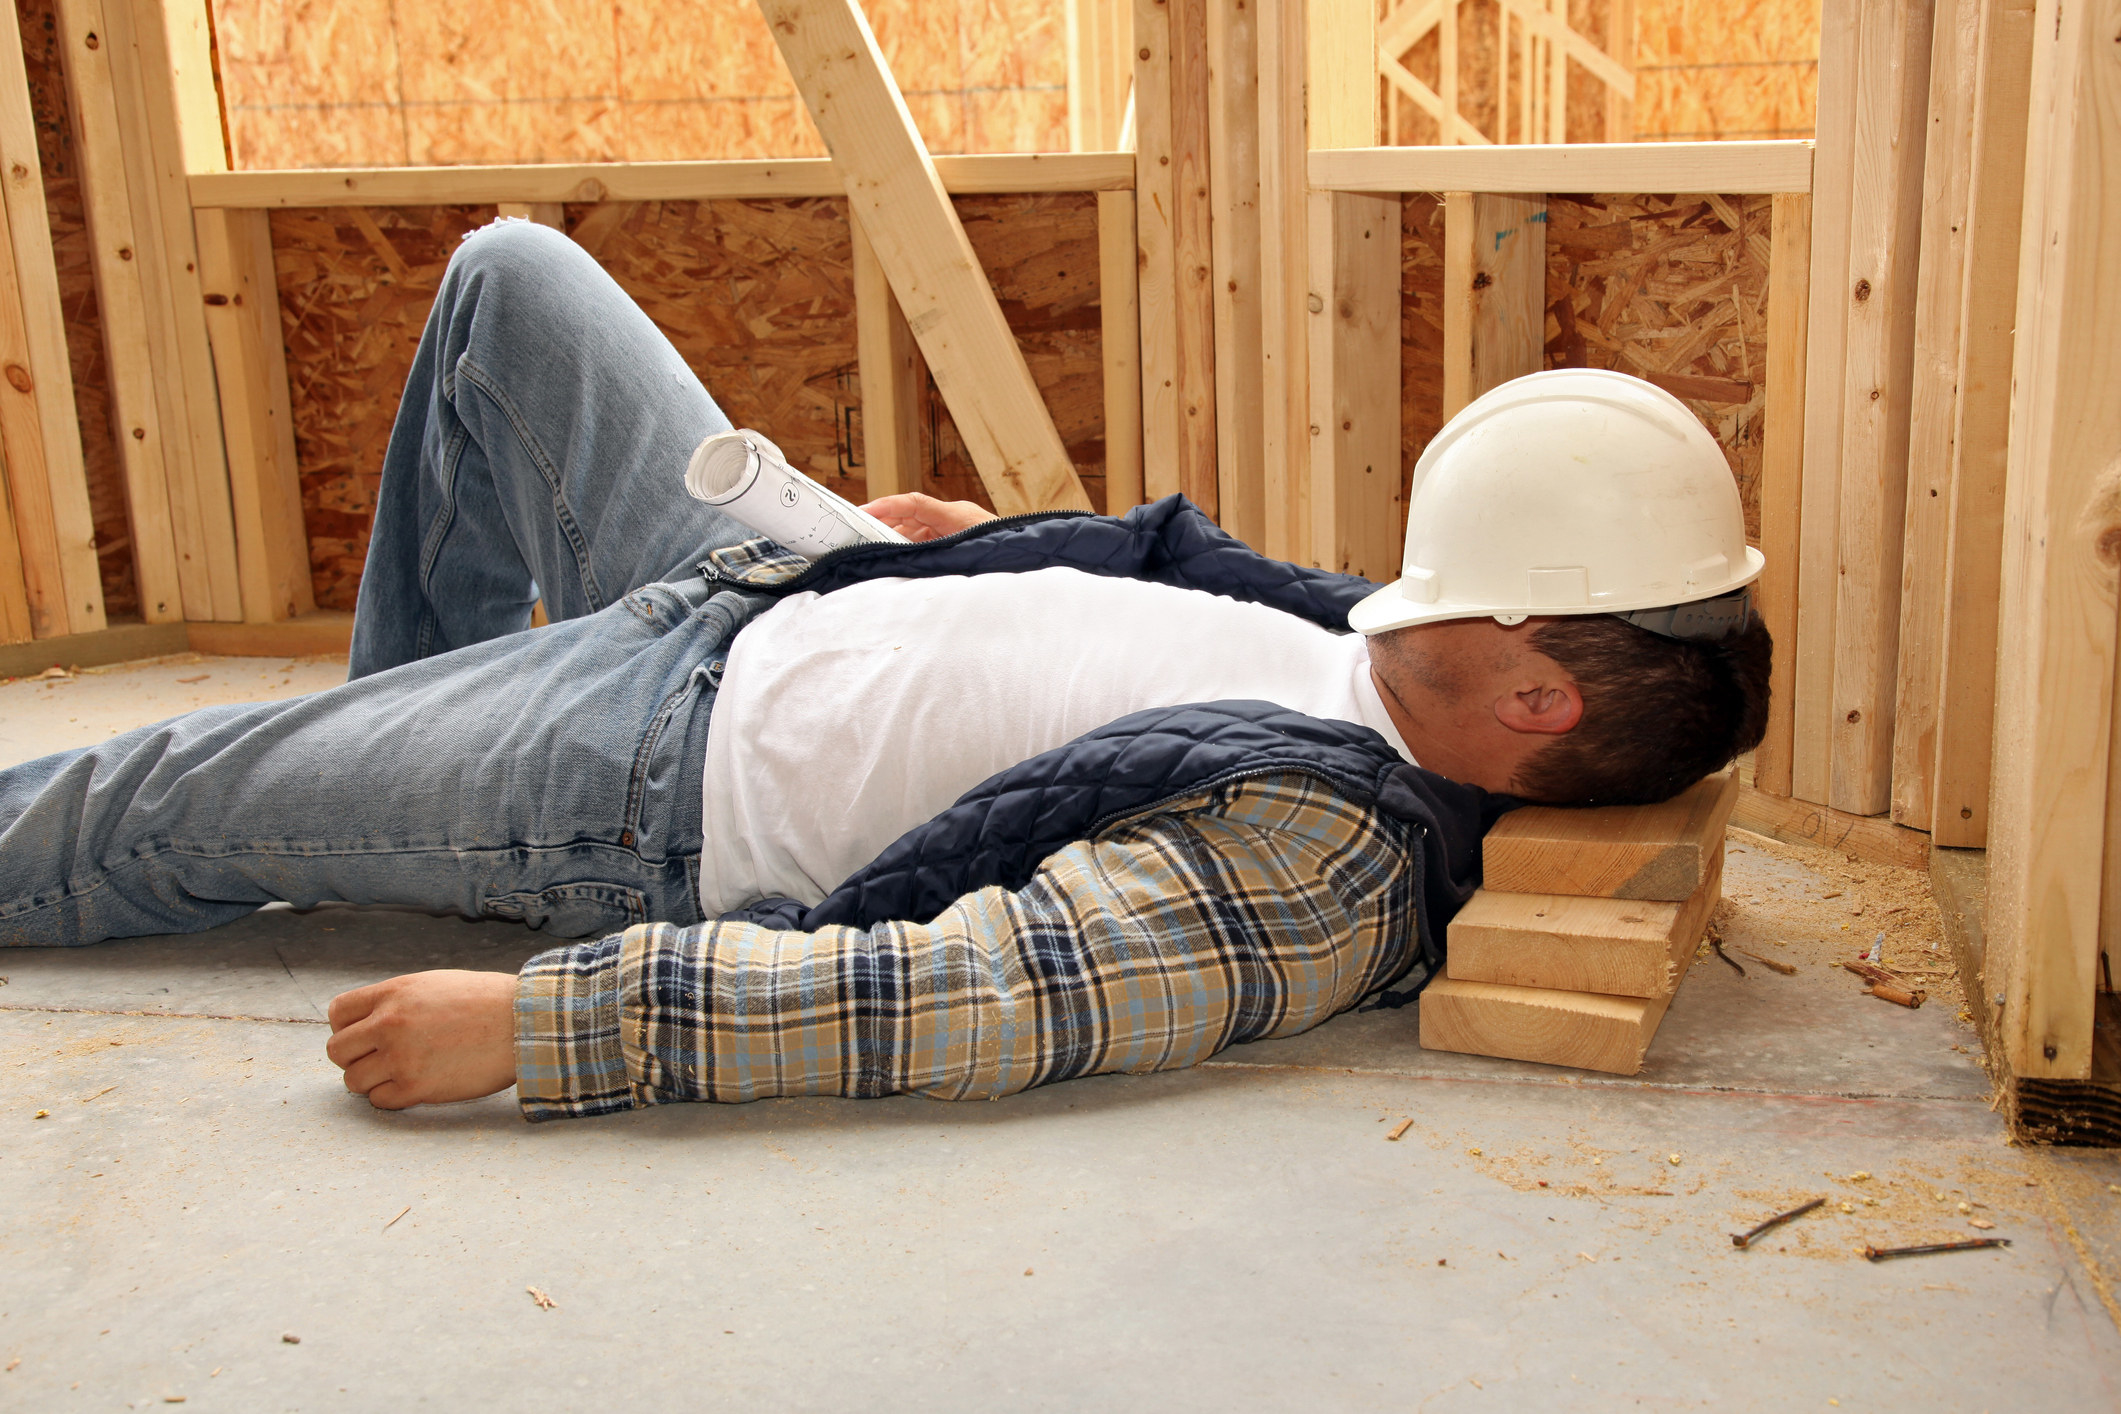 A construction worker sleeping on the job